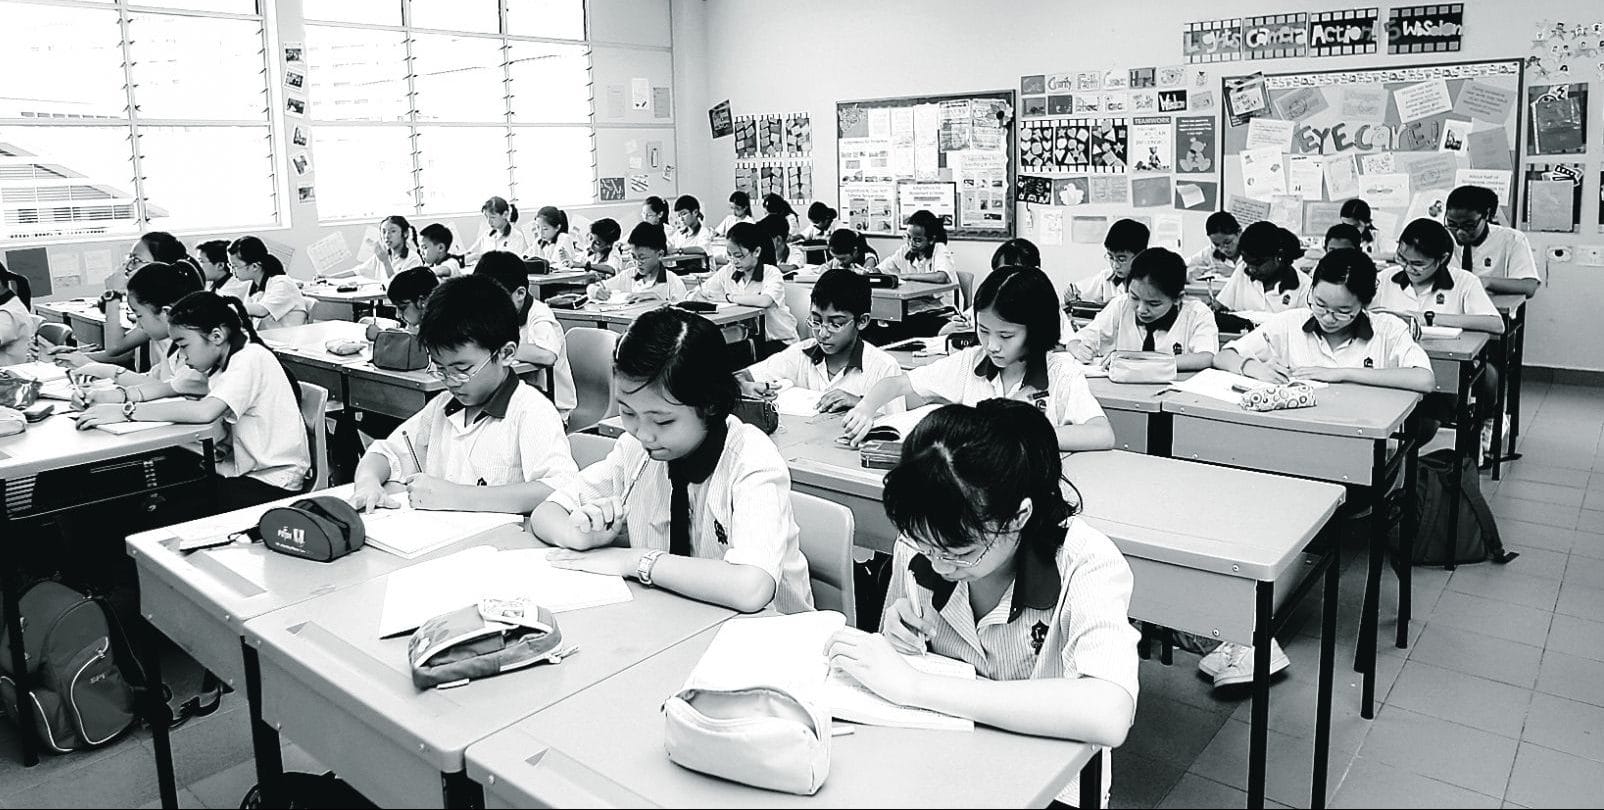 packed jc tuition centre